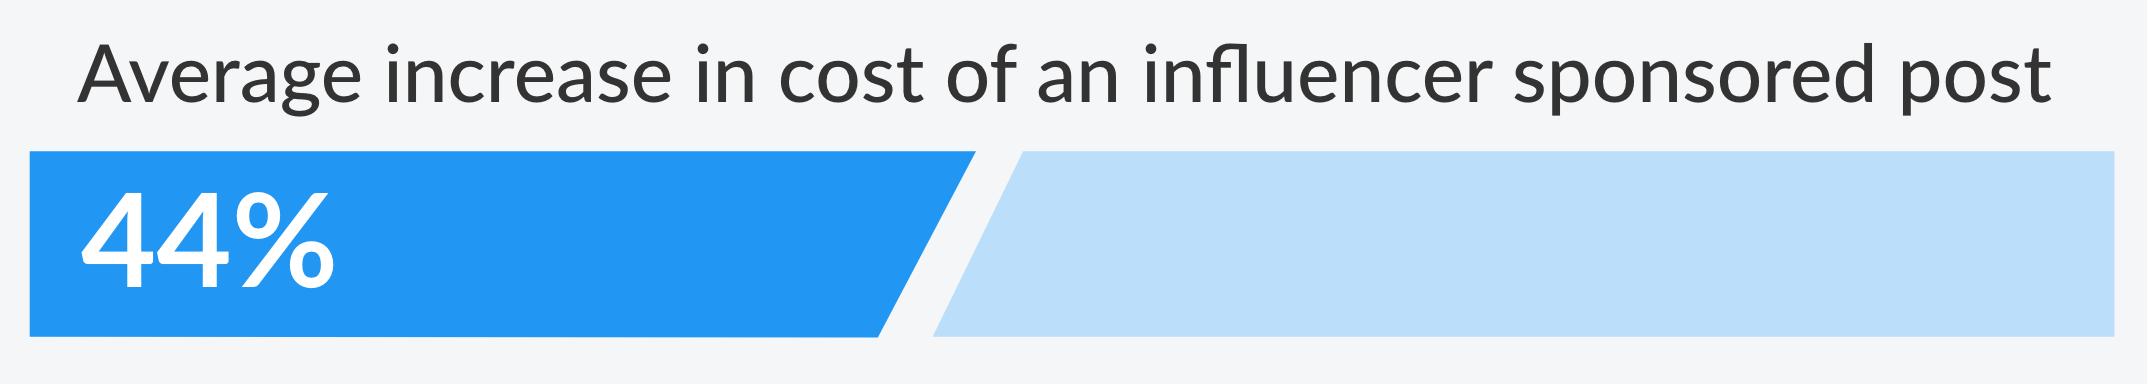 Influencer Infographic